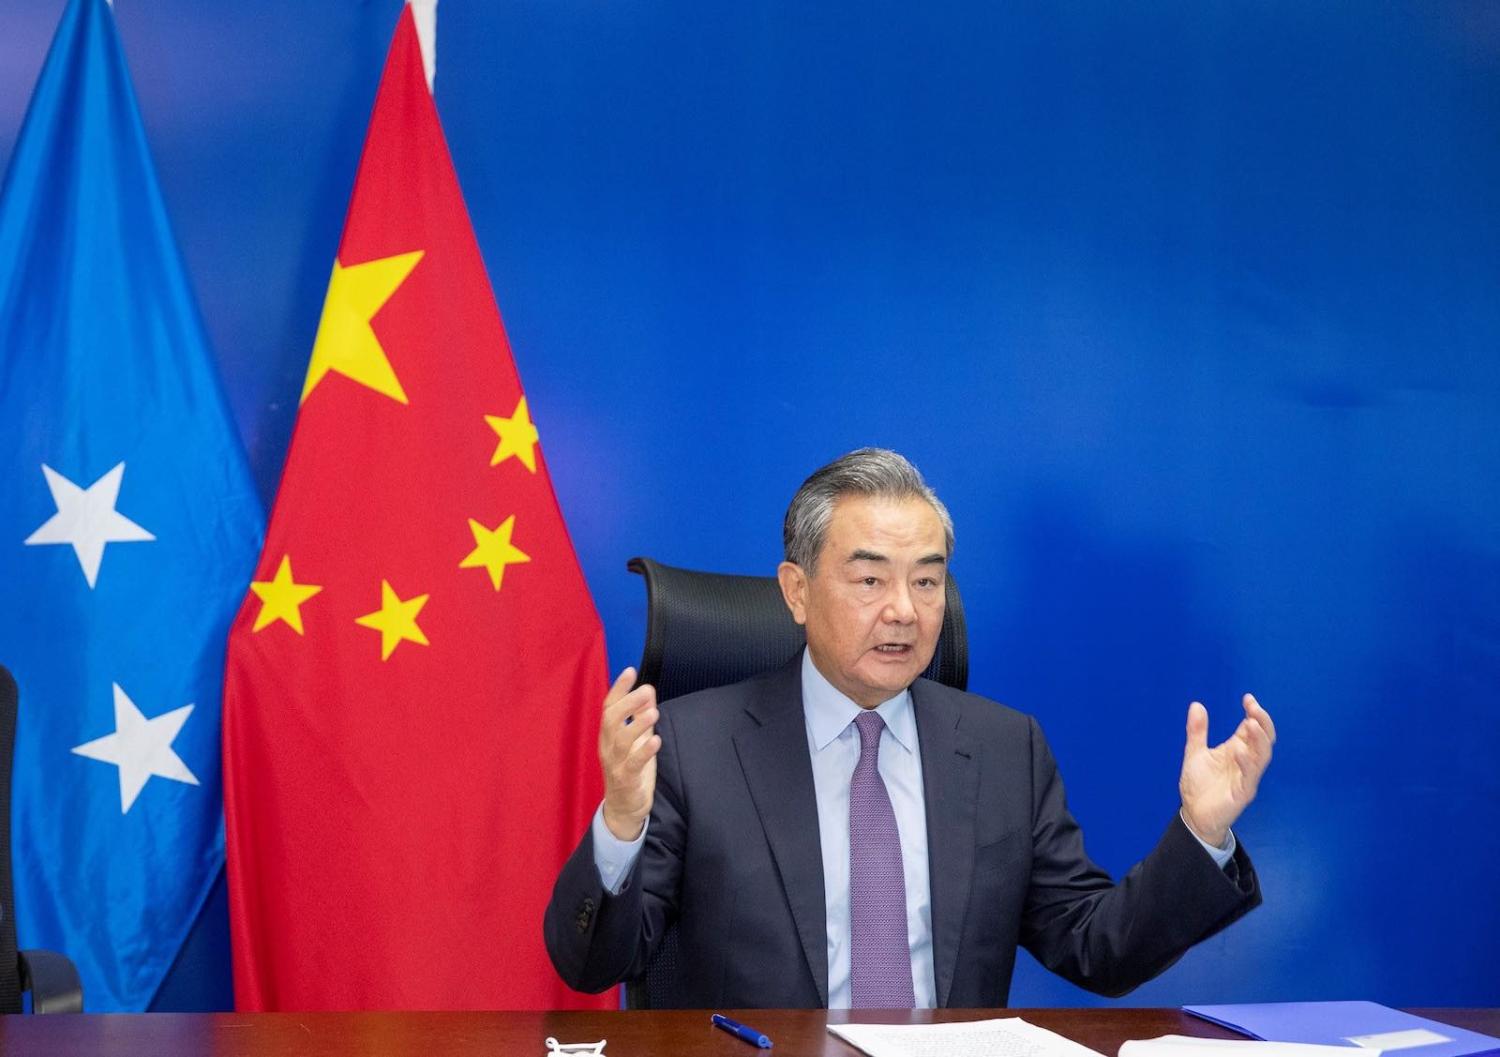 China’s Foreign Minister Wang Yi took a regional security and trade agreement to Pacific Island nations but is yet to garner regional support (Bai Xuefei/Xinhua via Getty Images)